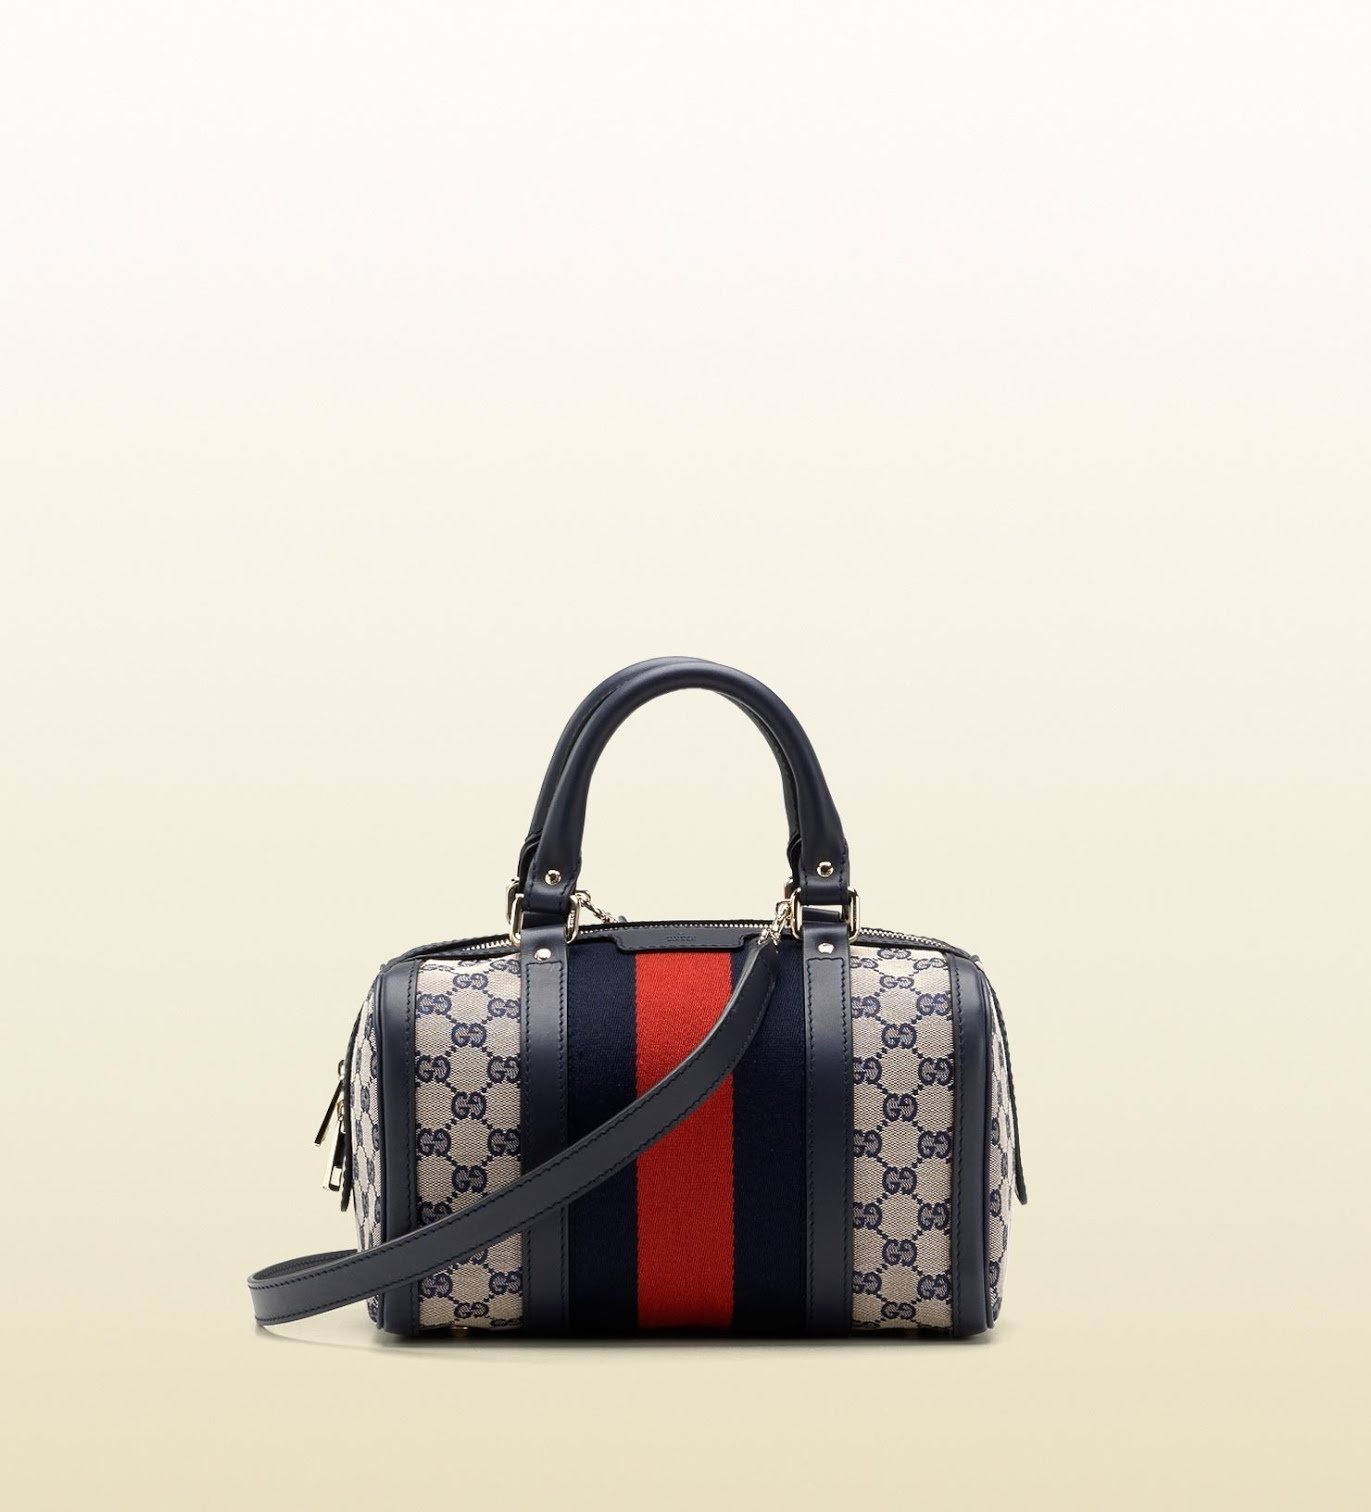 Who makes the best quality Gucci replica handbags? - Quora